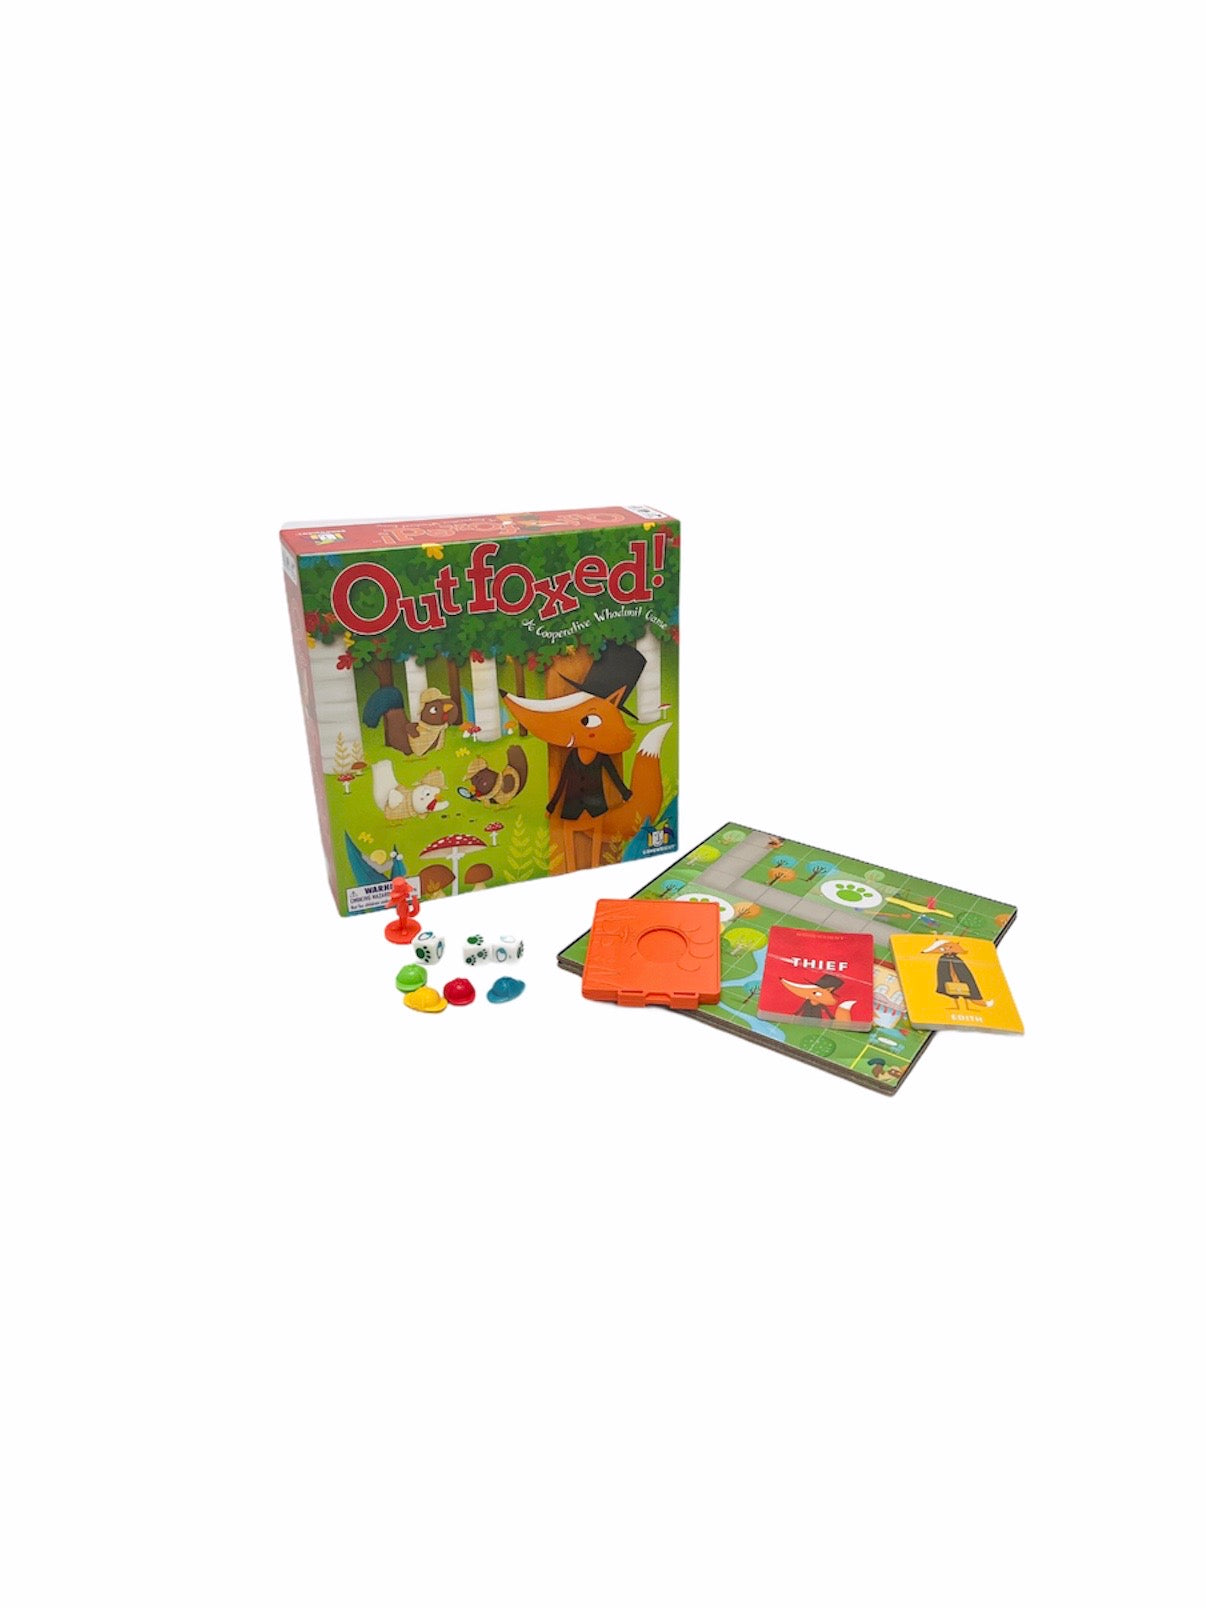 Gamewright Outfoxed with game pieces laid out in front of packaging box on white background